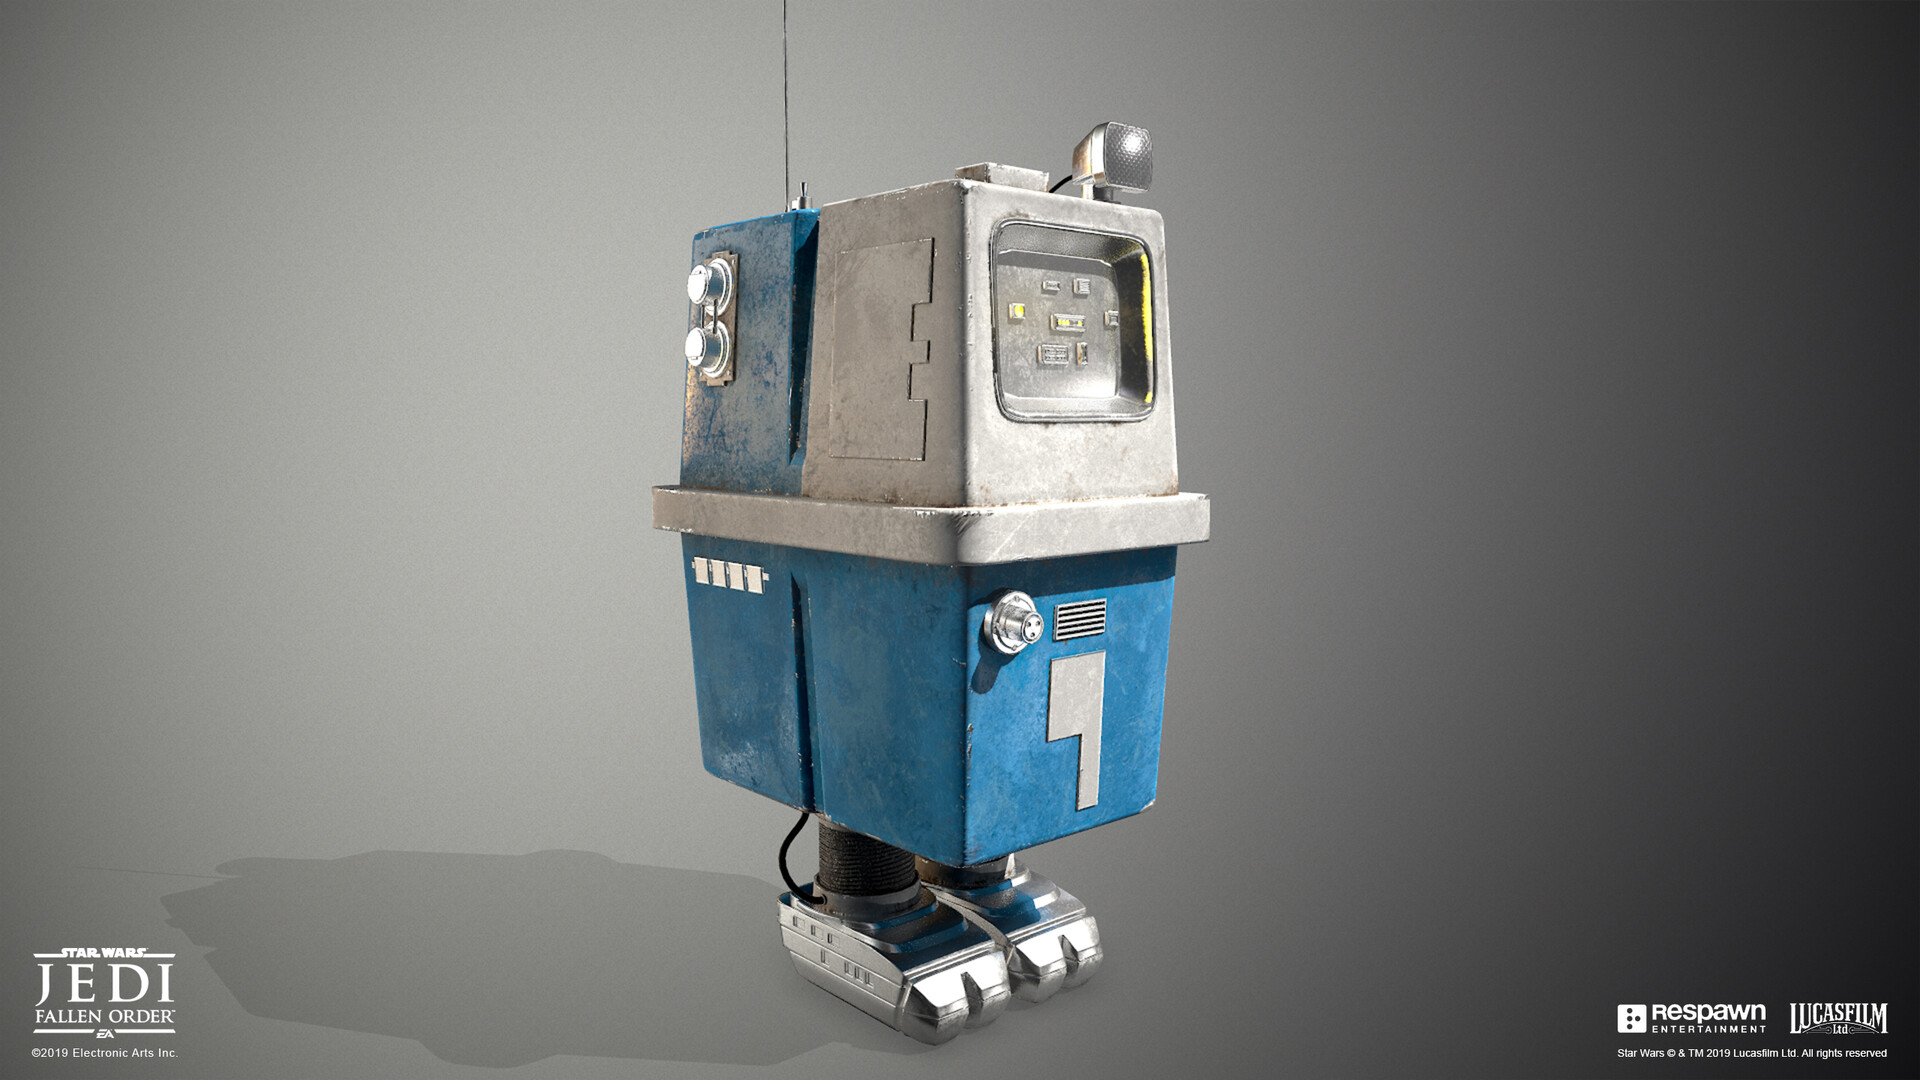 In Star Wars jedi fallen order a gonk droid appears in the game which makes me think this game could be connected to the Star Wars series